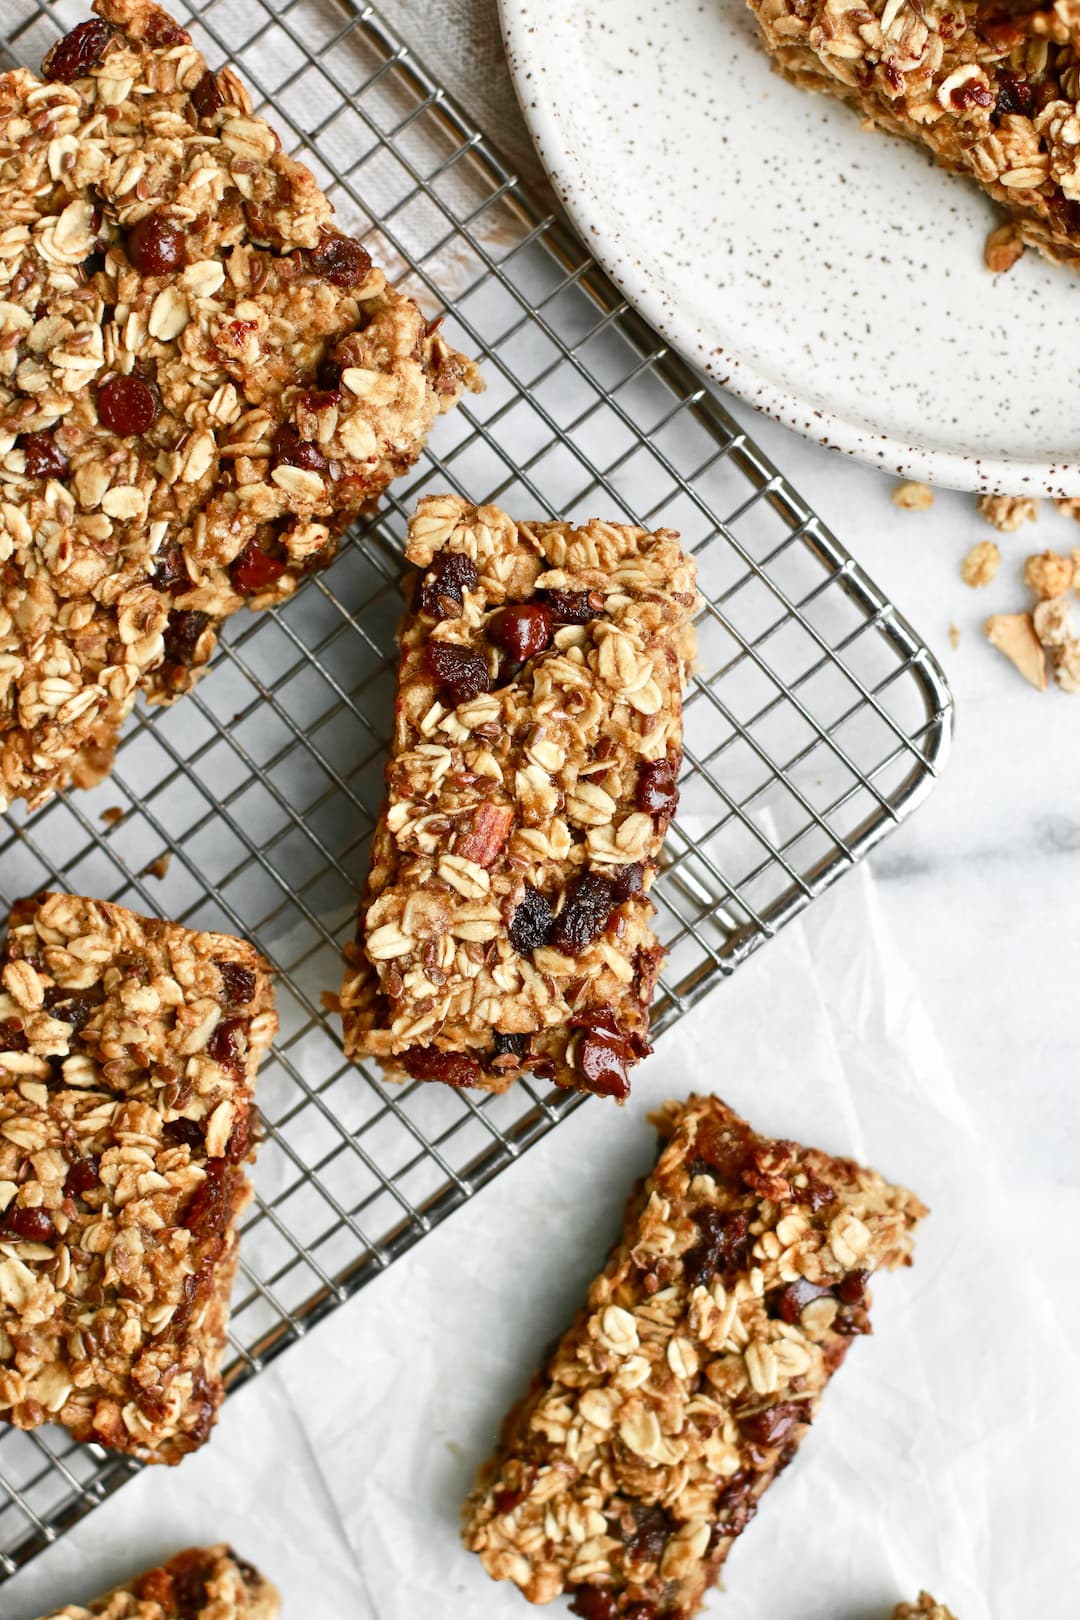 Easy and Healthy Chocolate Chip Granola Bars